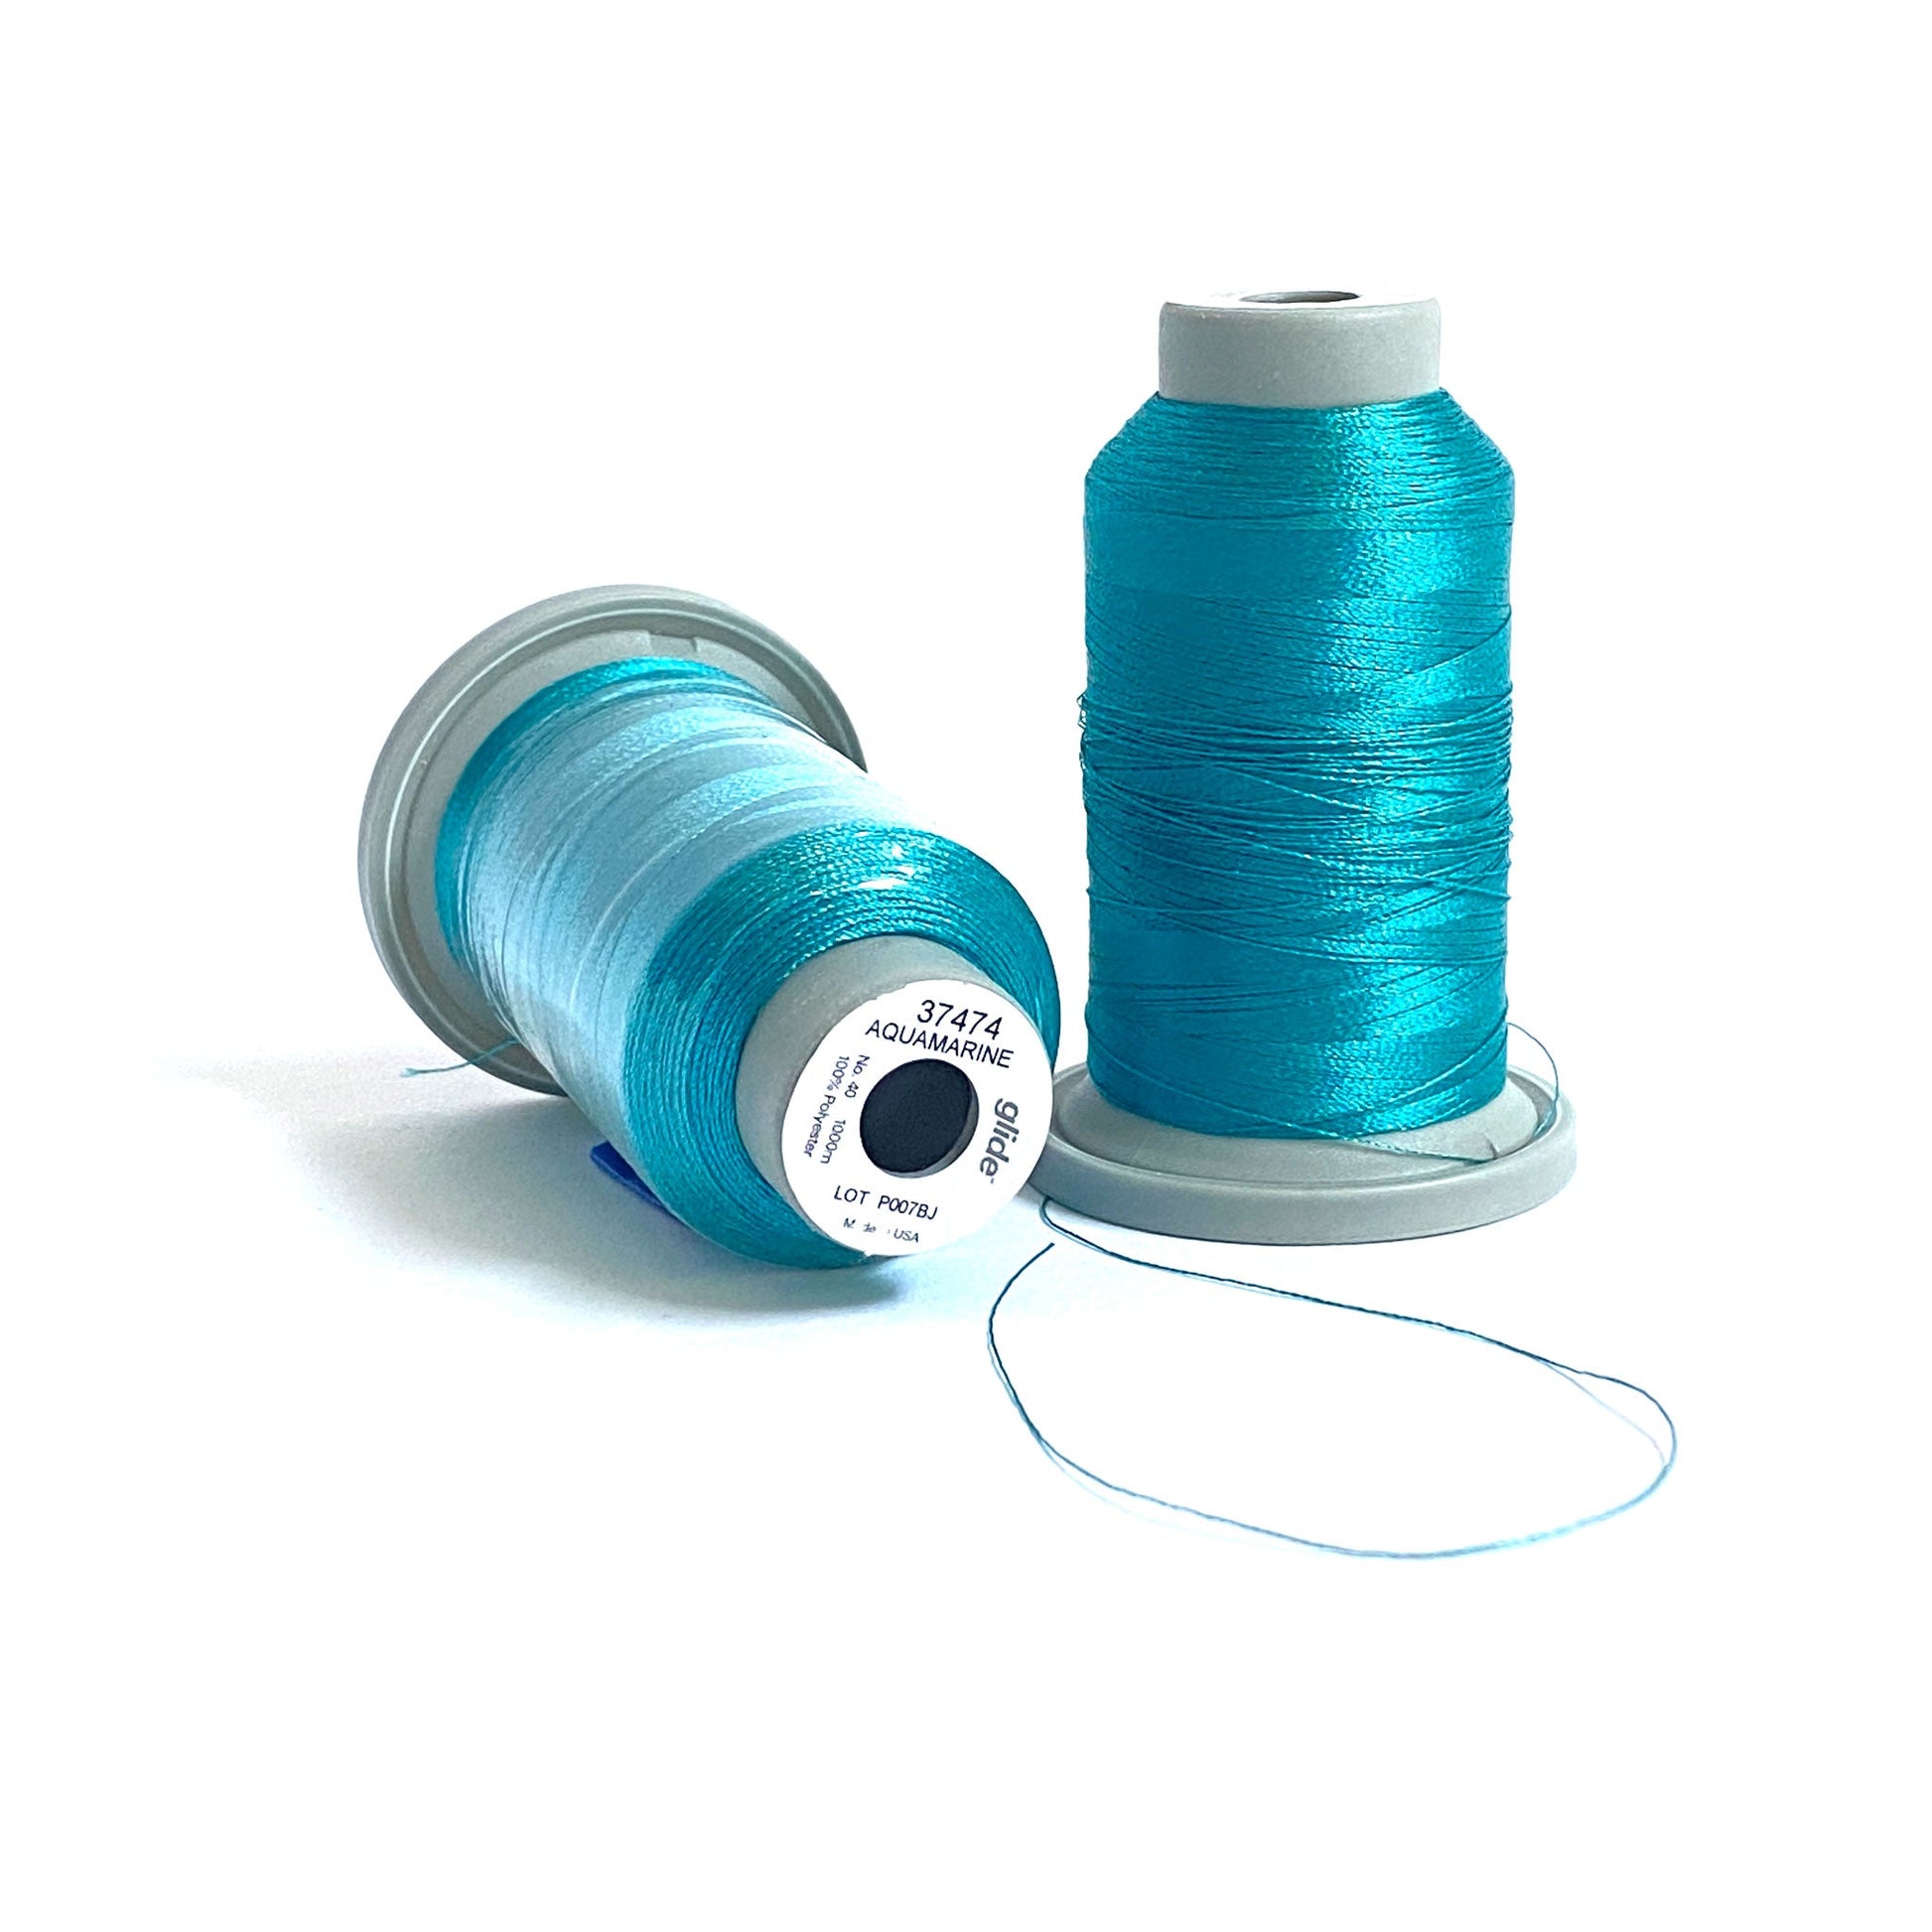 Glide 40 wt. Trilobal polyester thread by Fil-Tec offers superior coverage in each 1,100 yard mini spool. Aquamarine (37474) is a brightly aqua, and is perfect for depicting sea life or Mediterranean waters in embroidery or thread-painting. Stitcher's Joy